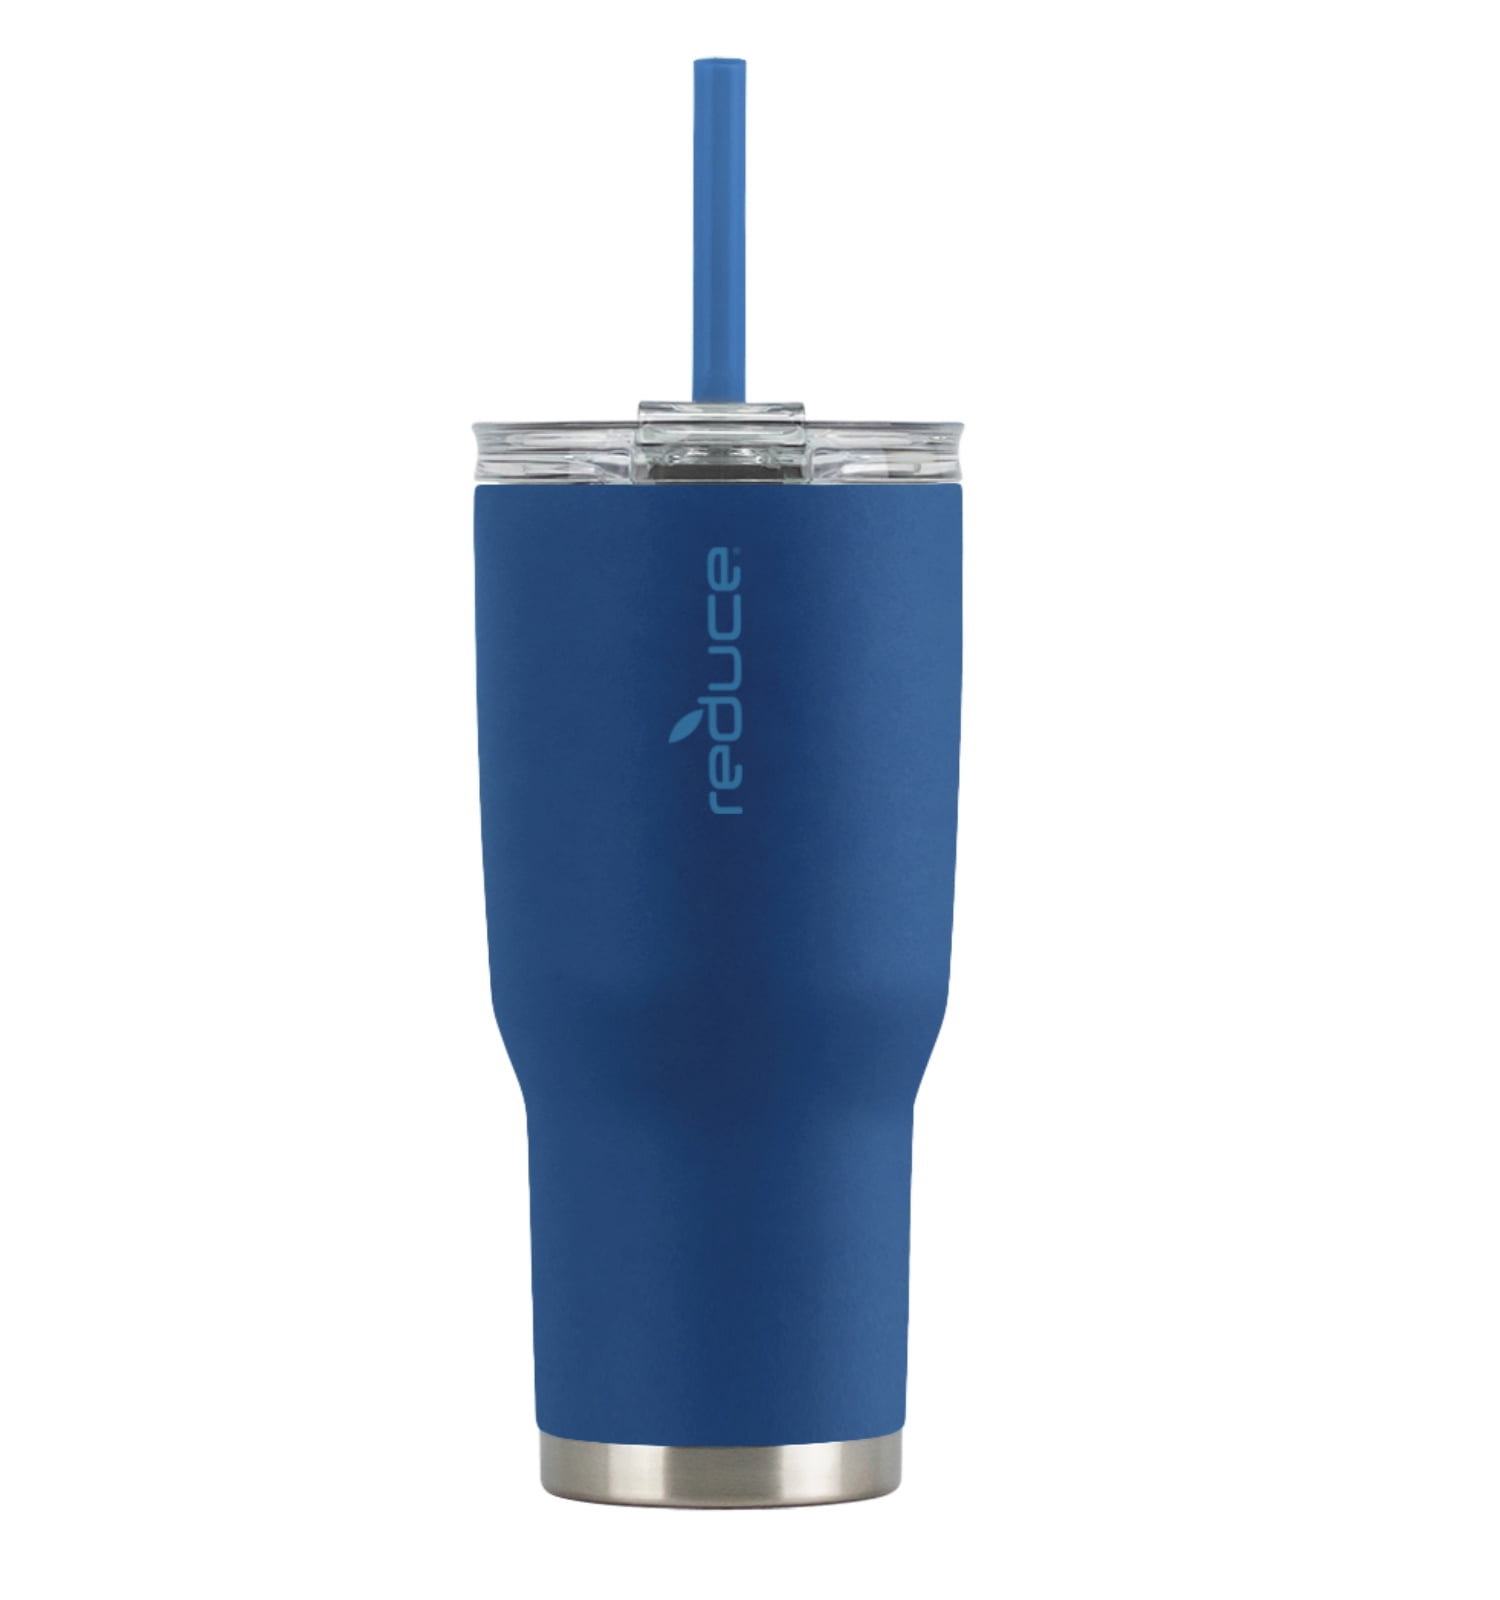 Reduce-cold-1-Stainless-Steel-Insulated-Tumbler-cup-2-pack-Keeps-Cold-24Hrs  Reduce-cold-1-Stainles / gifts&gadgets